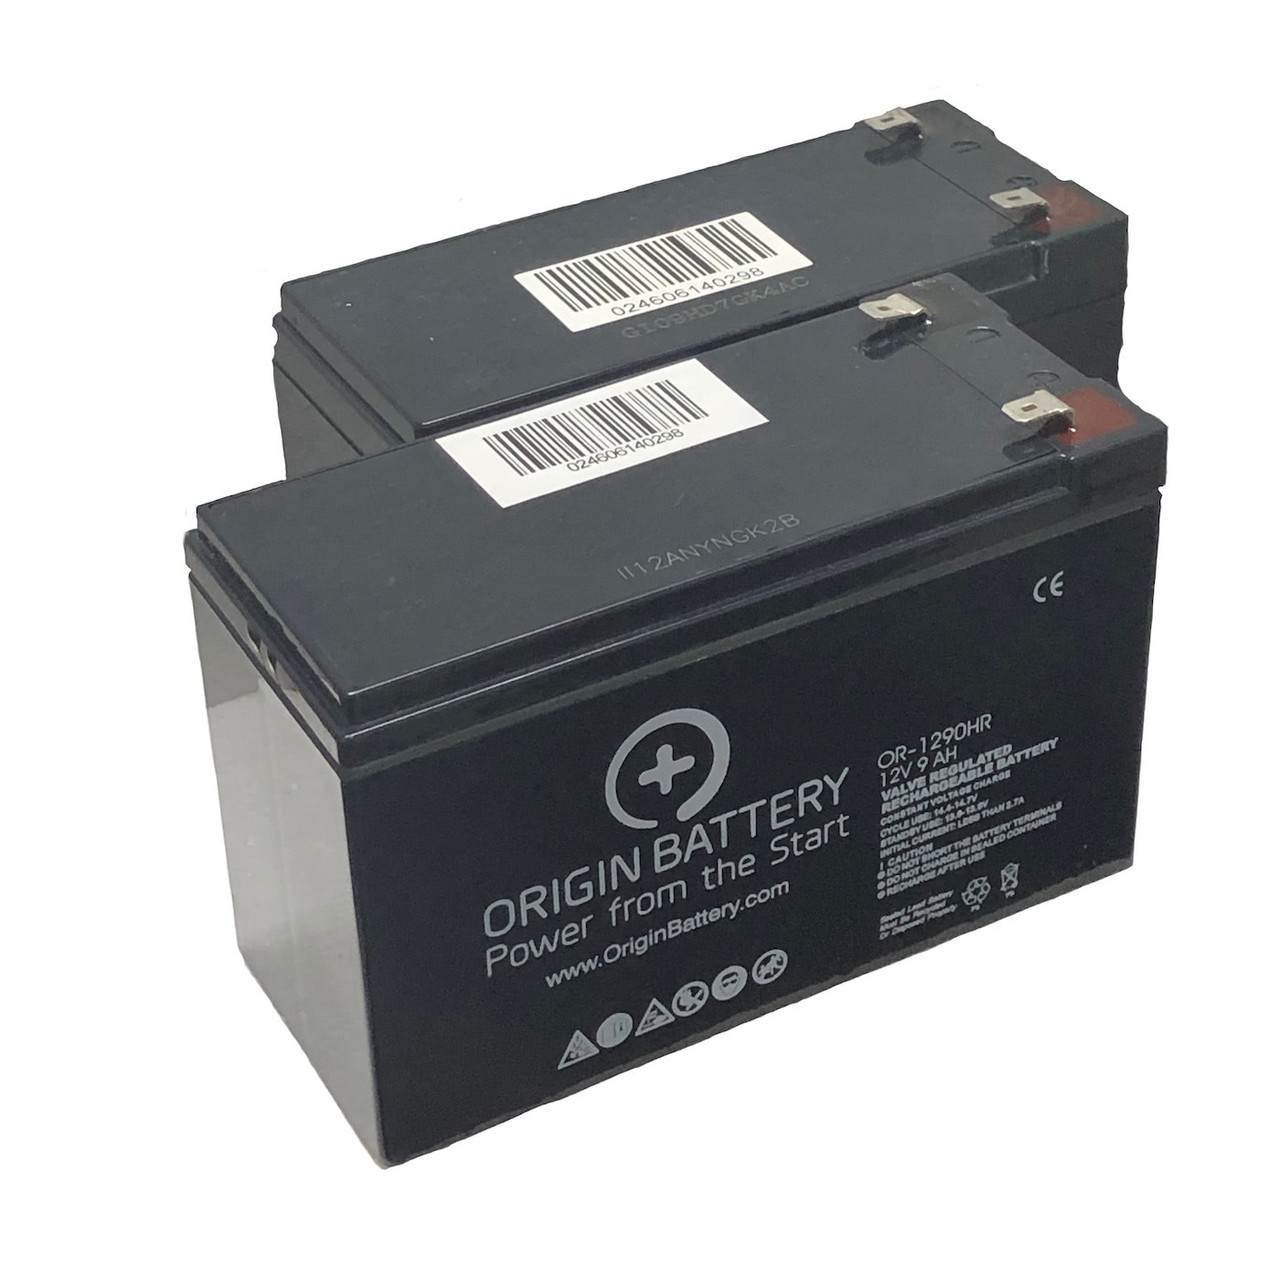 what is the manufacture date of the APCRBC123 battery that i would be receiving